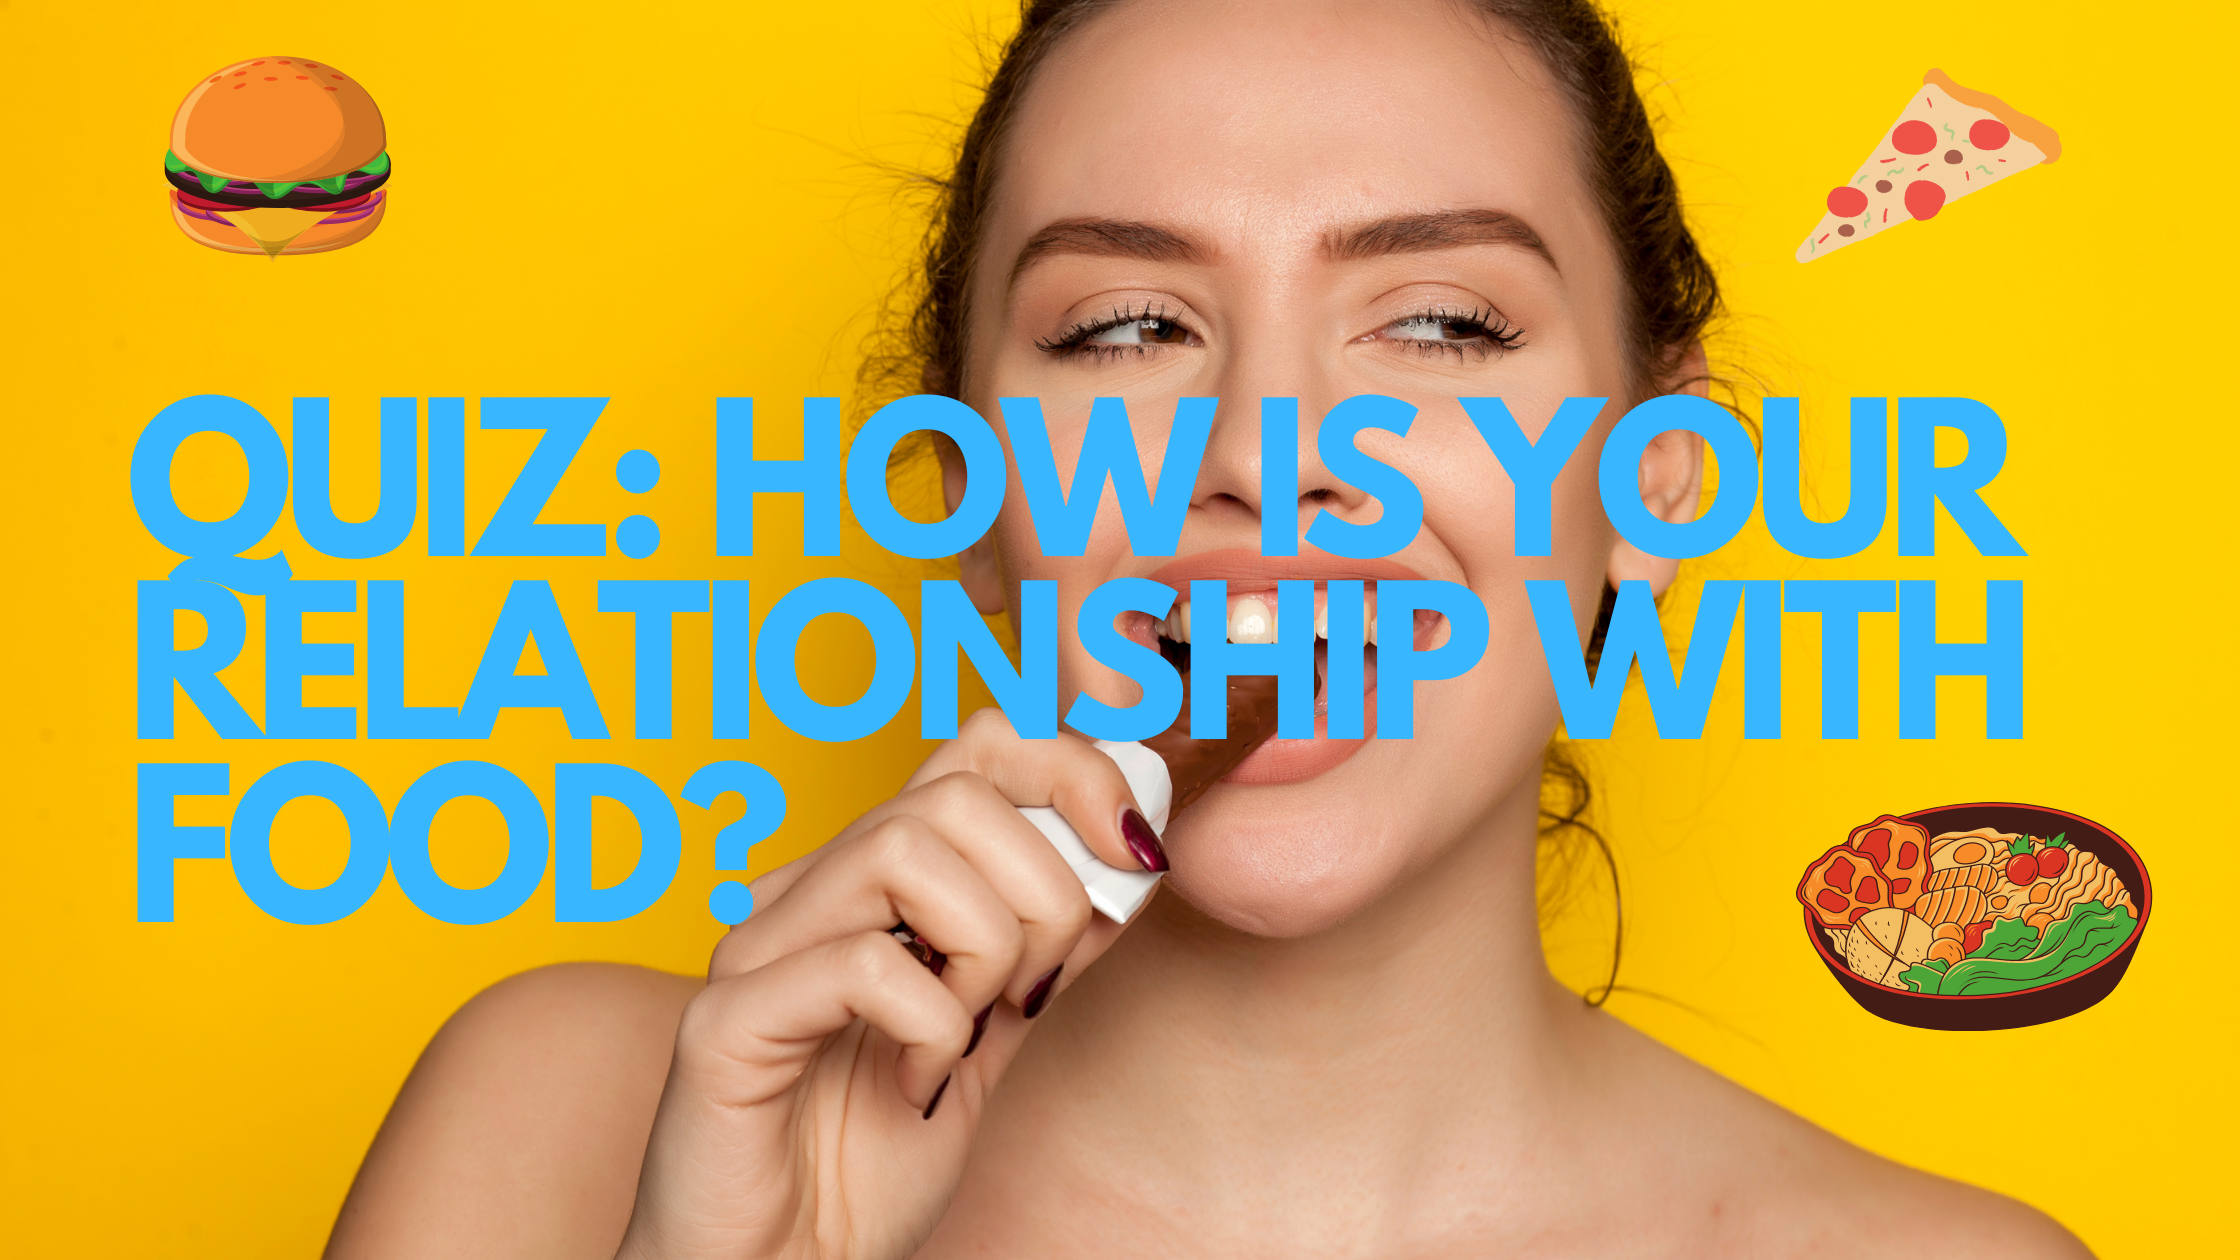 QUIZ: HOW IS YOUR RELATIONSHIP WITH FOOD?